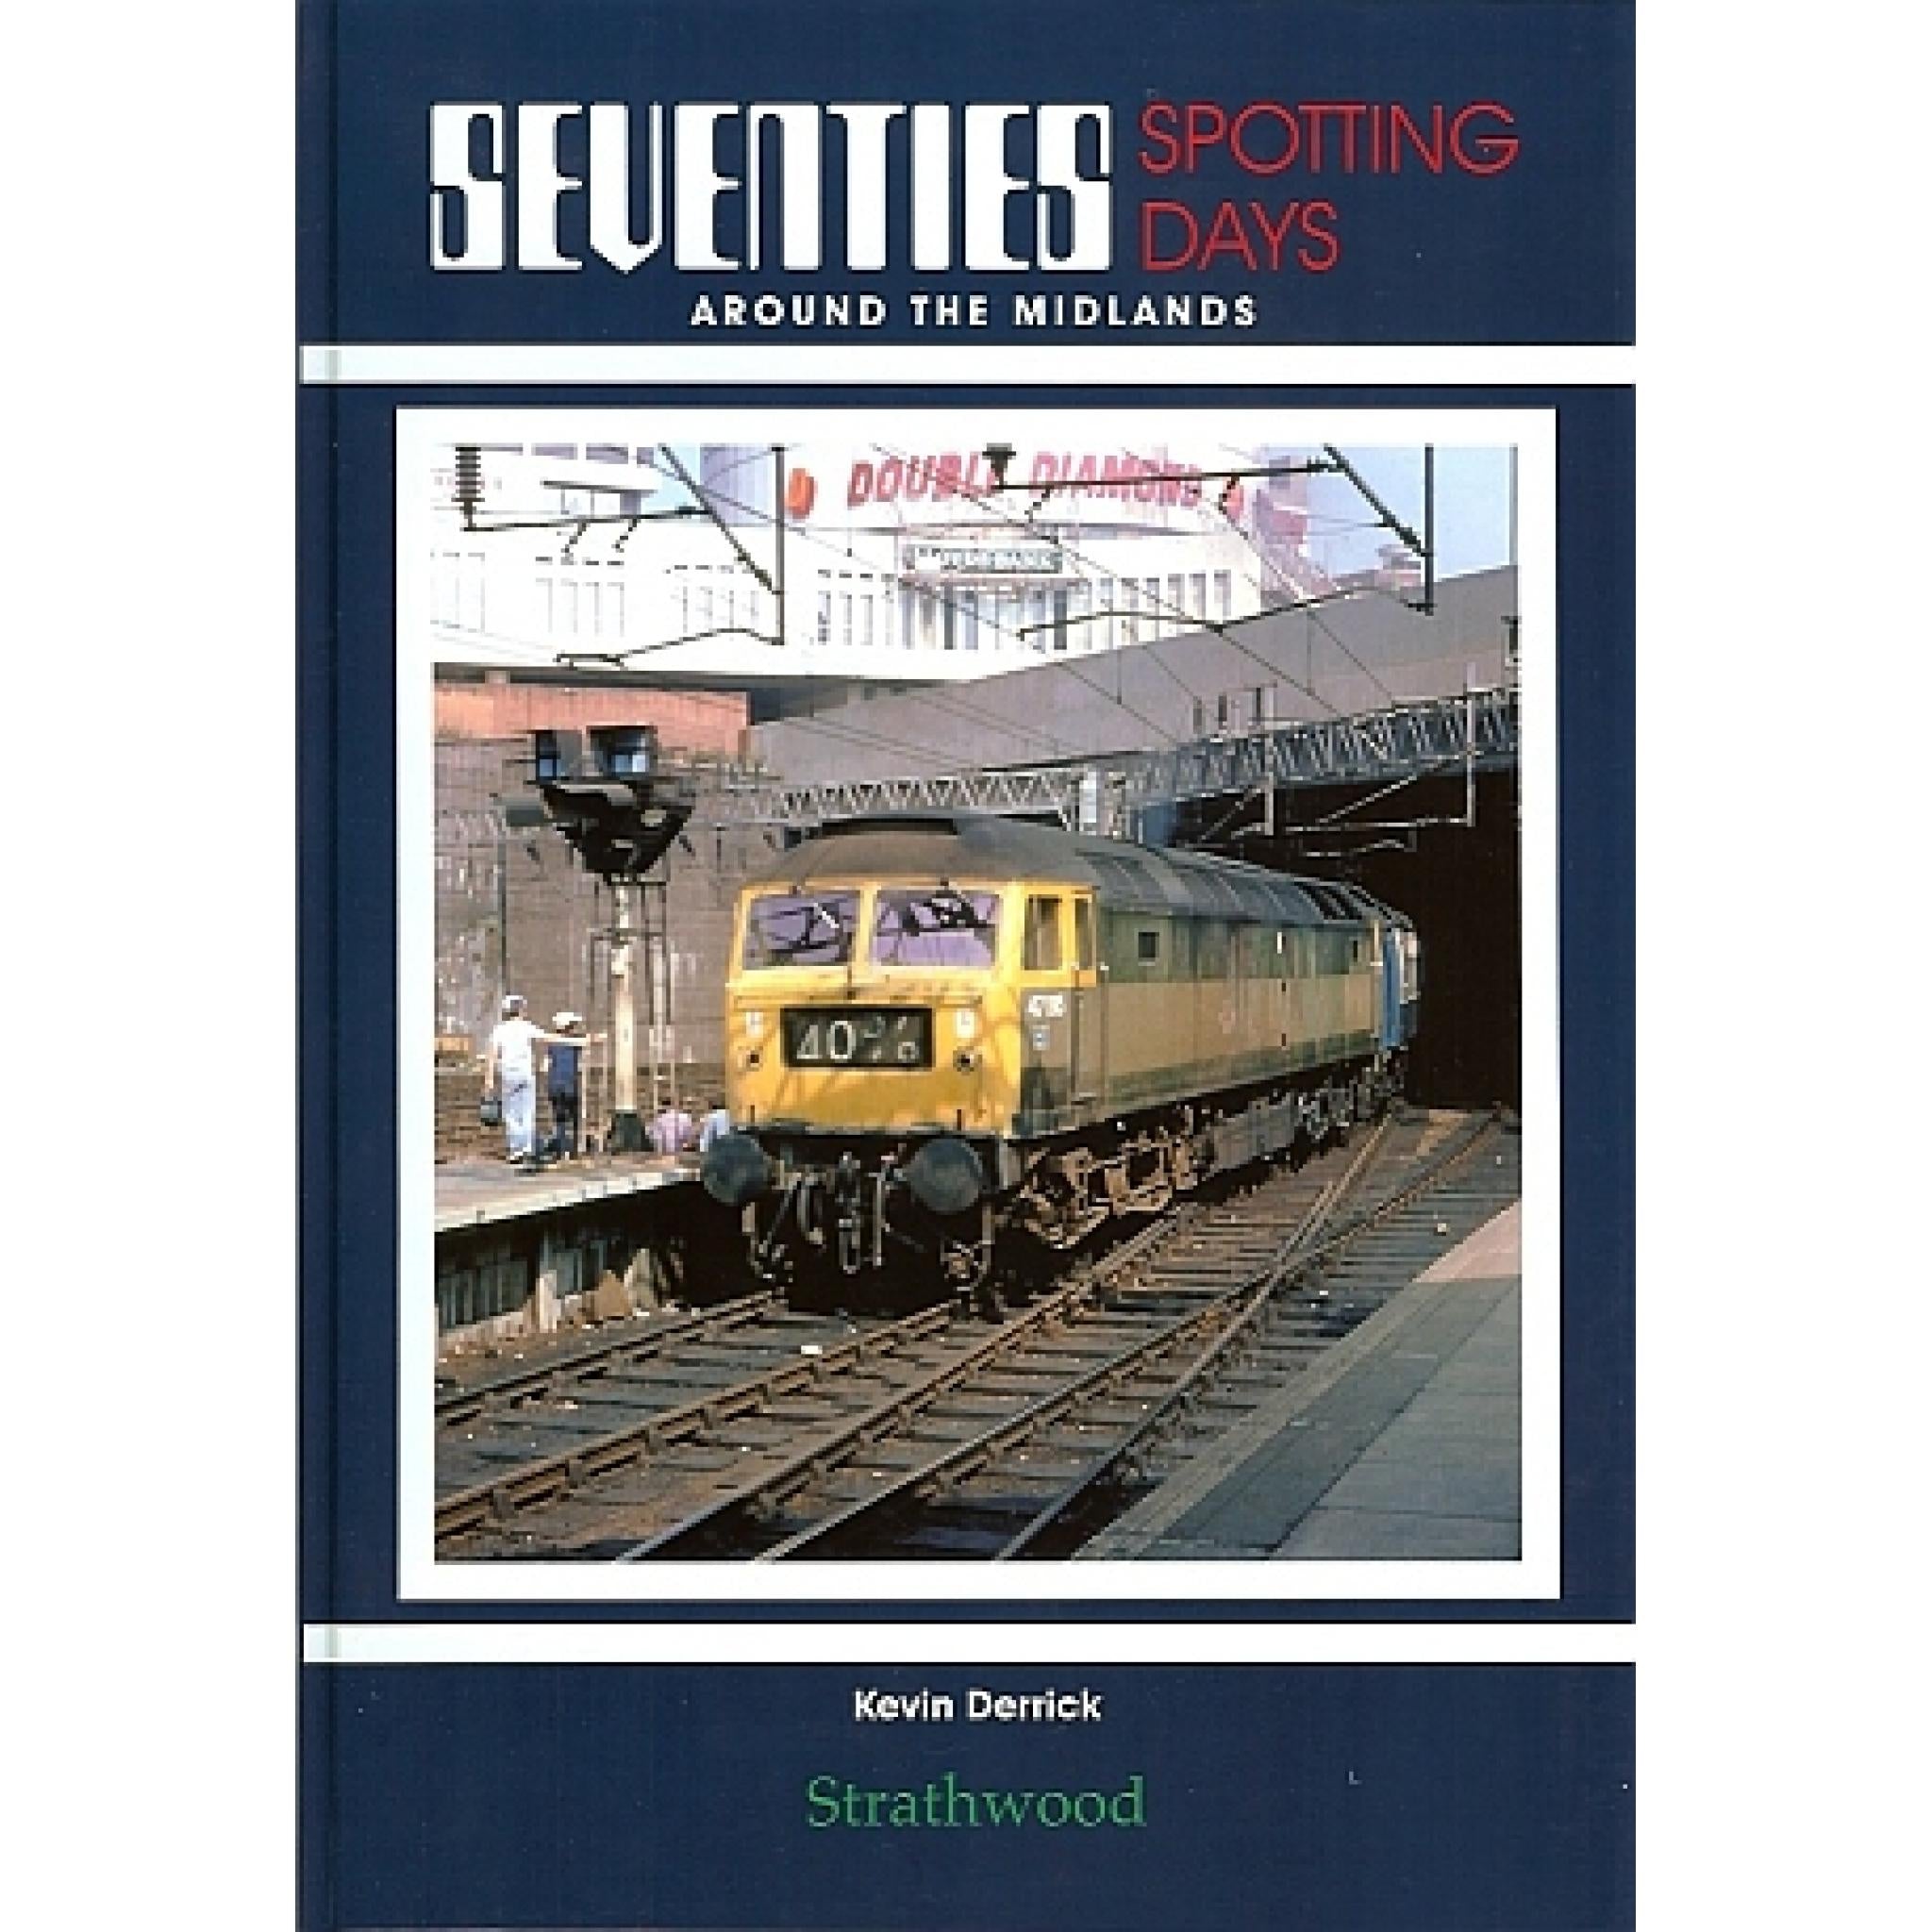 75%+ OFF RRP is £19.95  Seventies Spotting Days around the Midlands